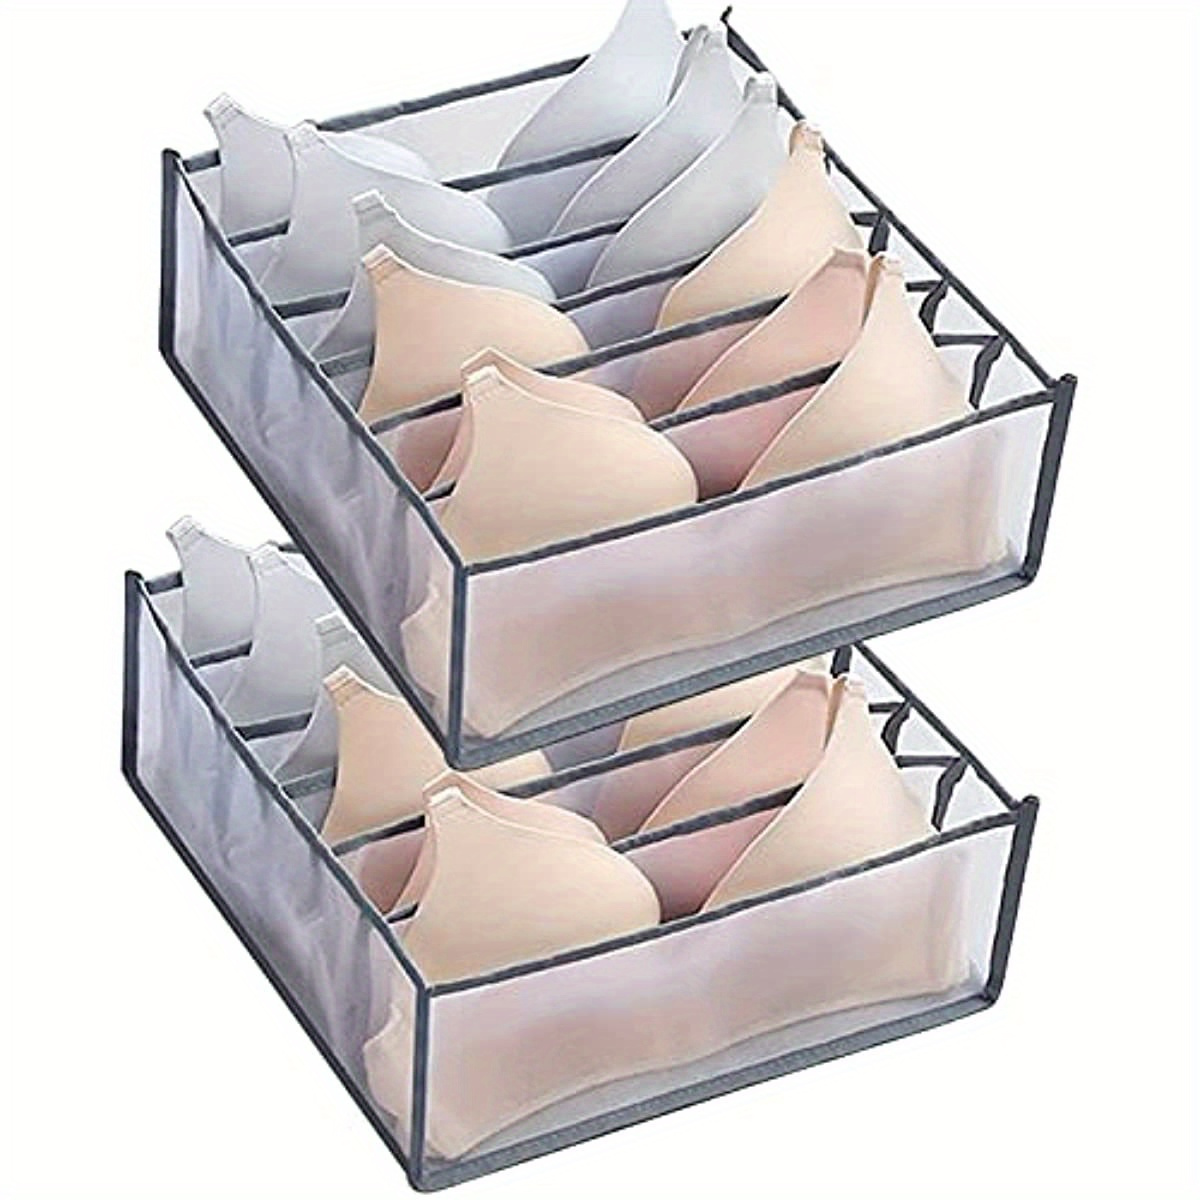 Charmamiofficial - lingerie storage box three units set. BUY  NOW👉 Compartment underwear  storage organizer.Lingerie storage box three units set.Say goodbye to chaos  tidy storage.No more messy storage not